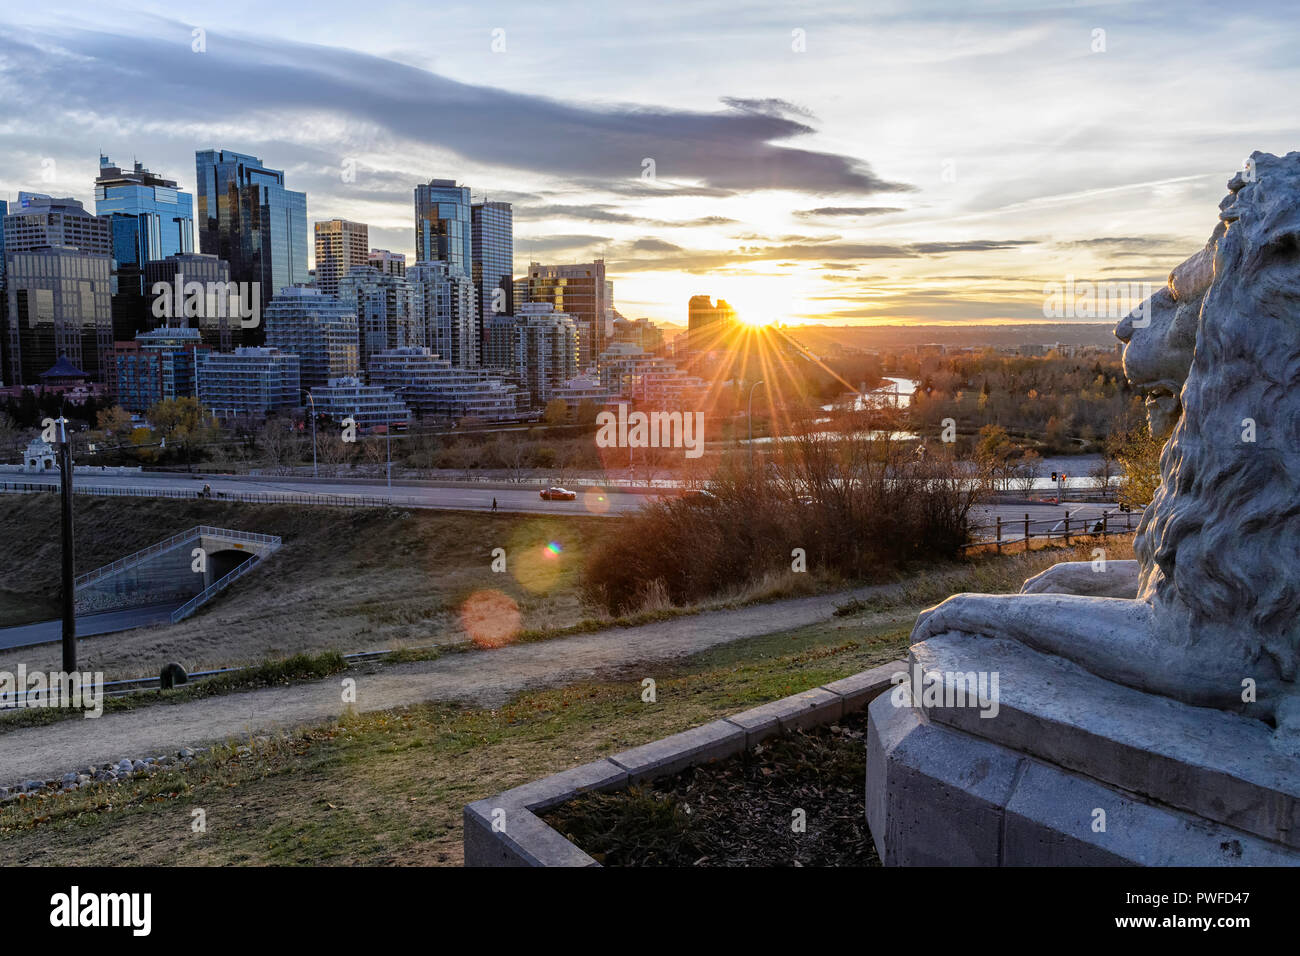 An iconic Calgary lion sculpture now overlooks its old home on Centre Street Bridge installed in Rotary Park, Calgary skyline, Alberta Canada Stock Photo